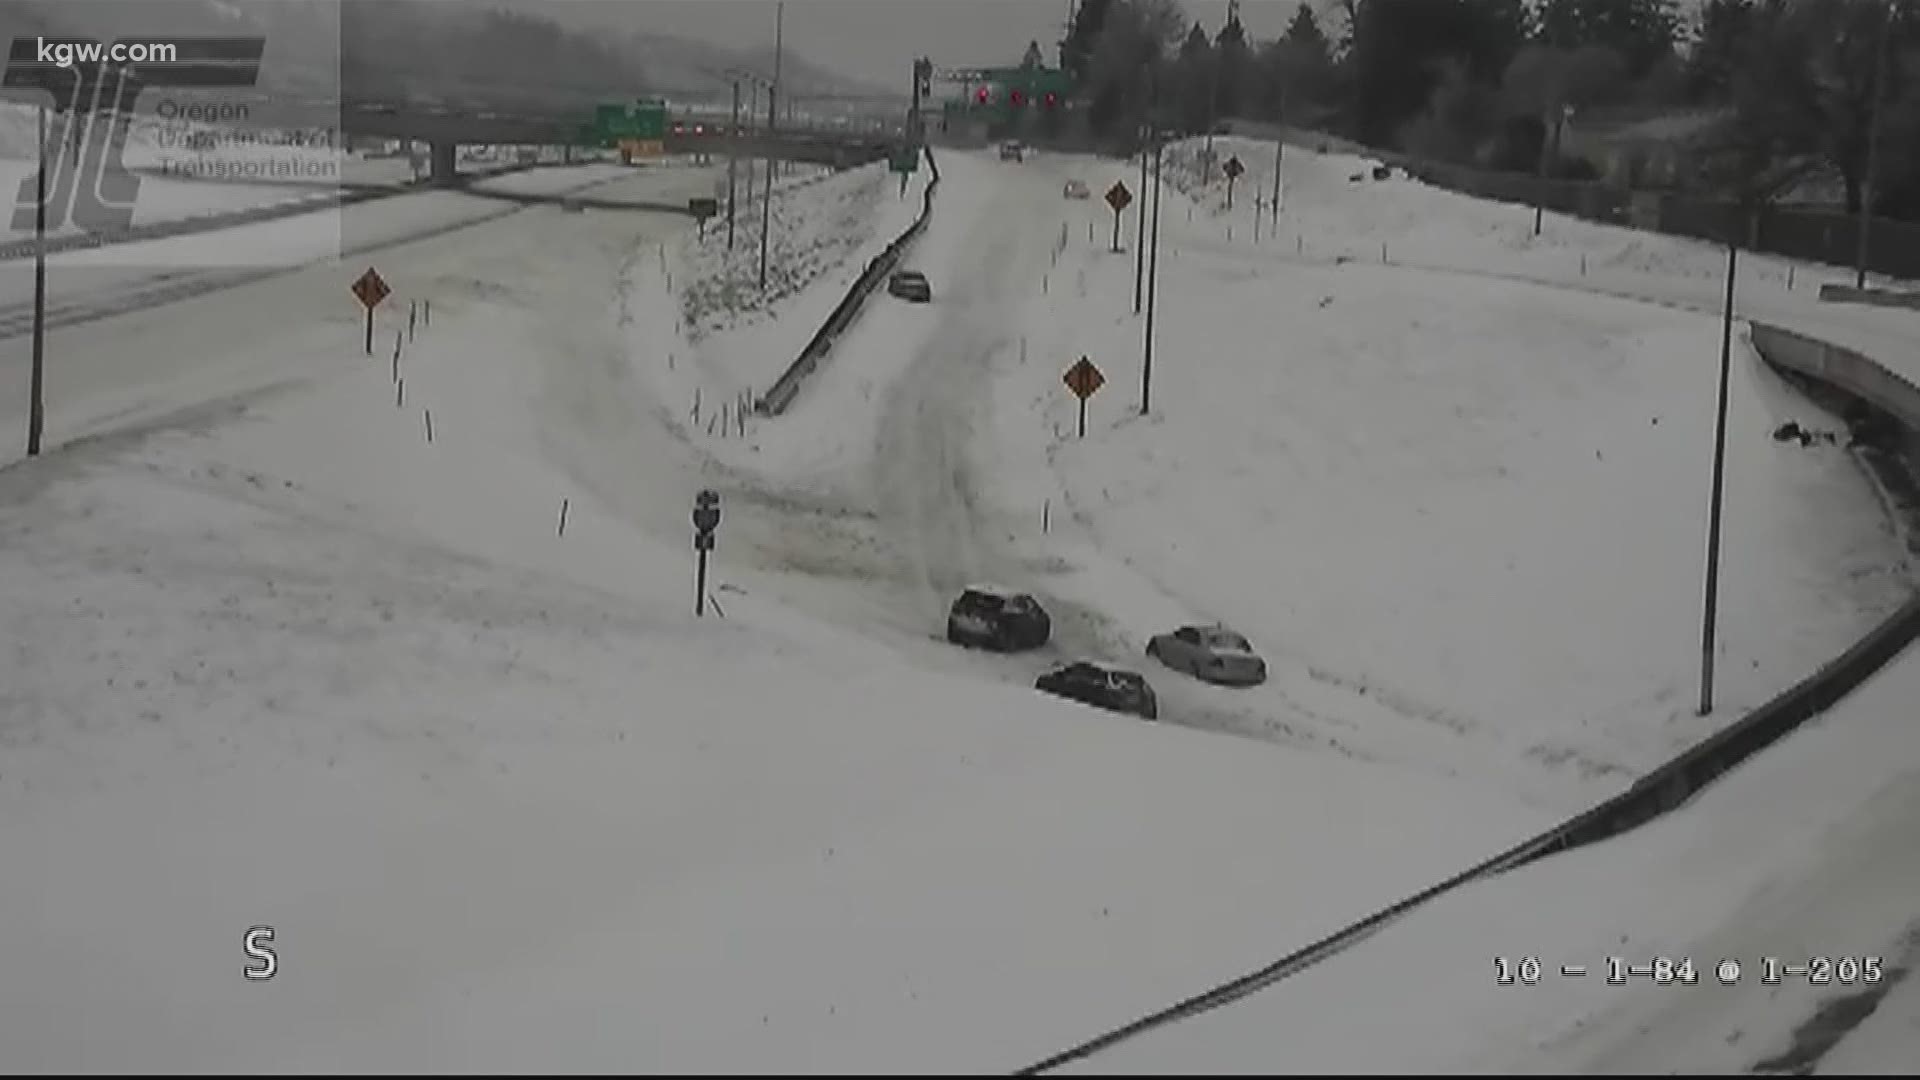 Snow and freezing rain from a winter storm have led to snow-covered roads in the Columbia River Gorge and traffic issues in the Portland metro area.